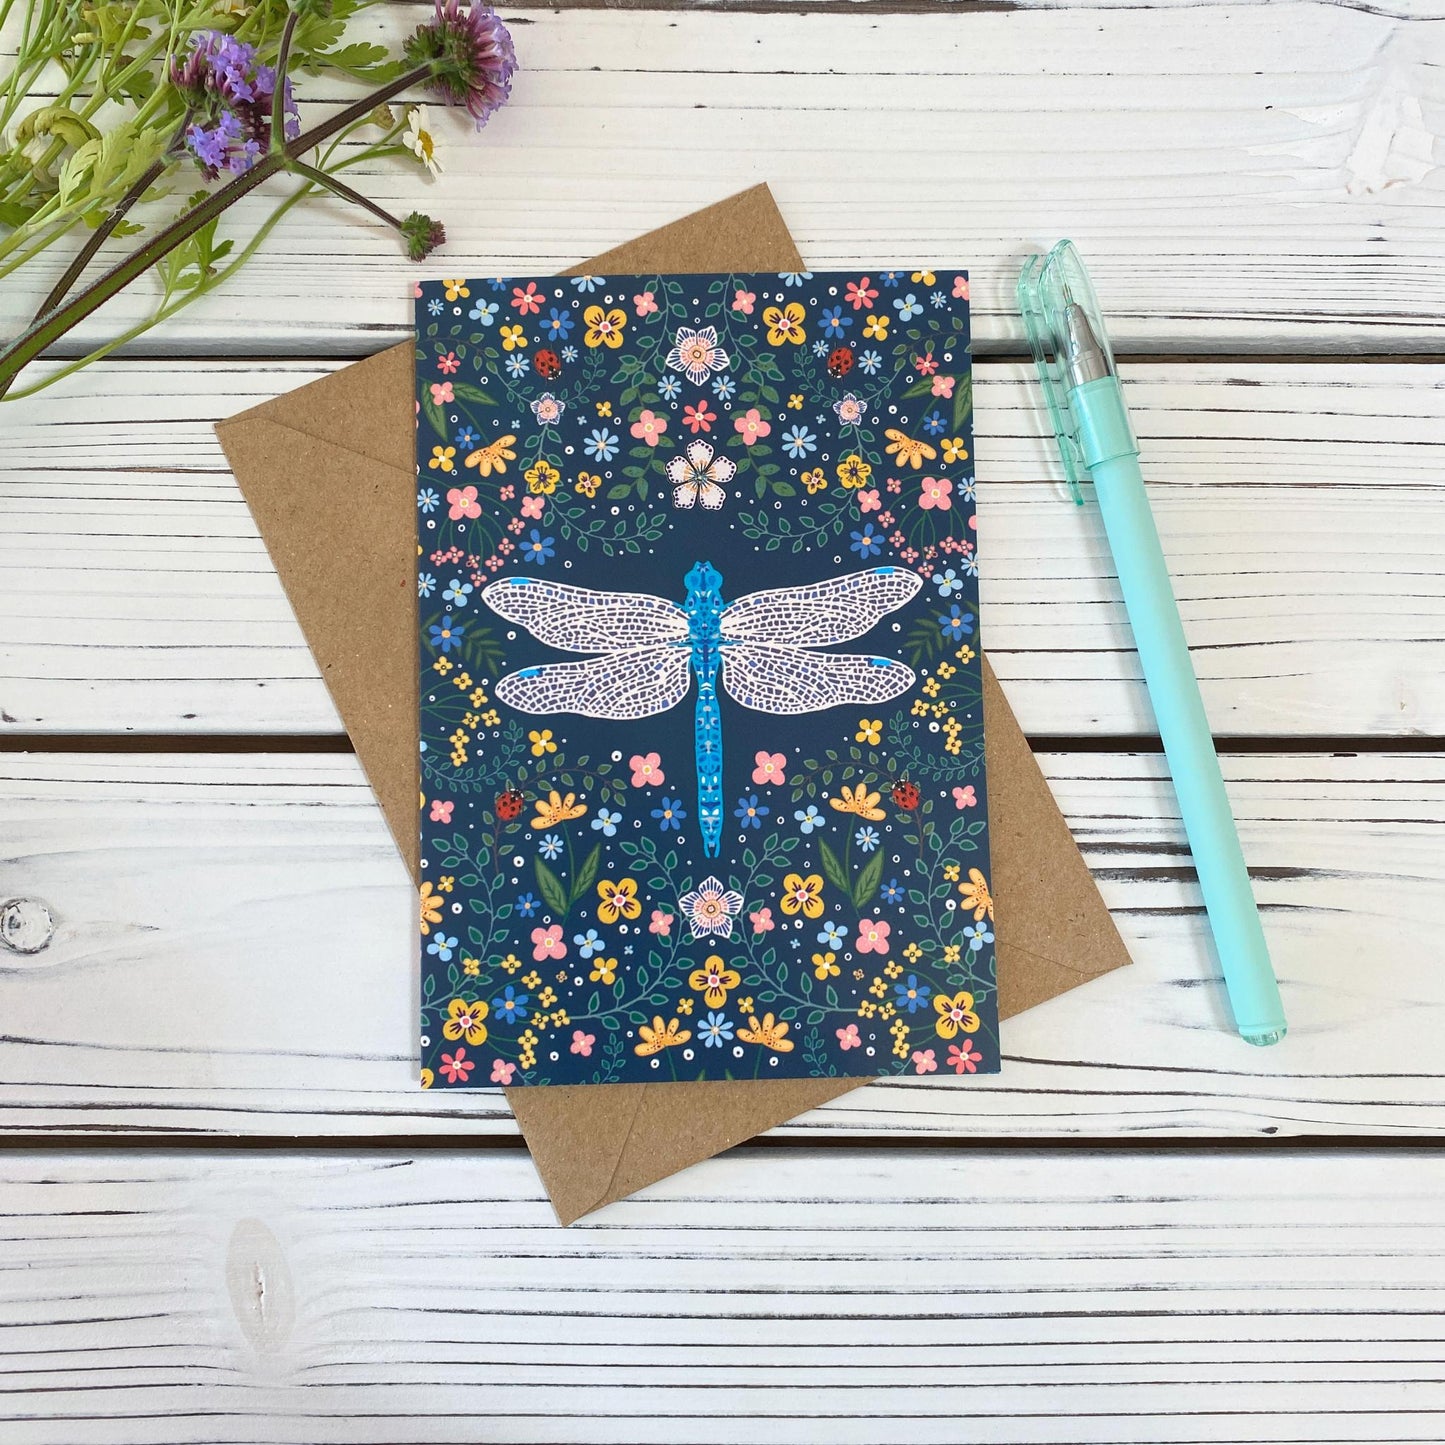 Dragonfly Greeting Card